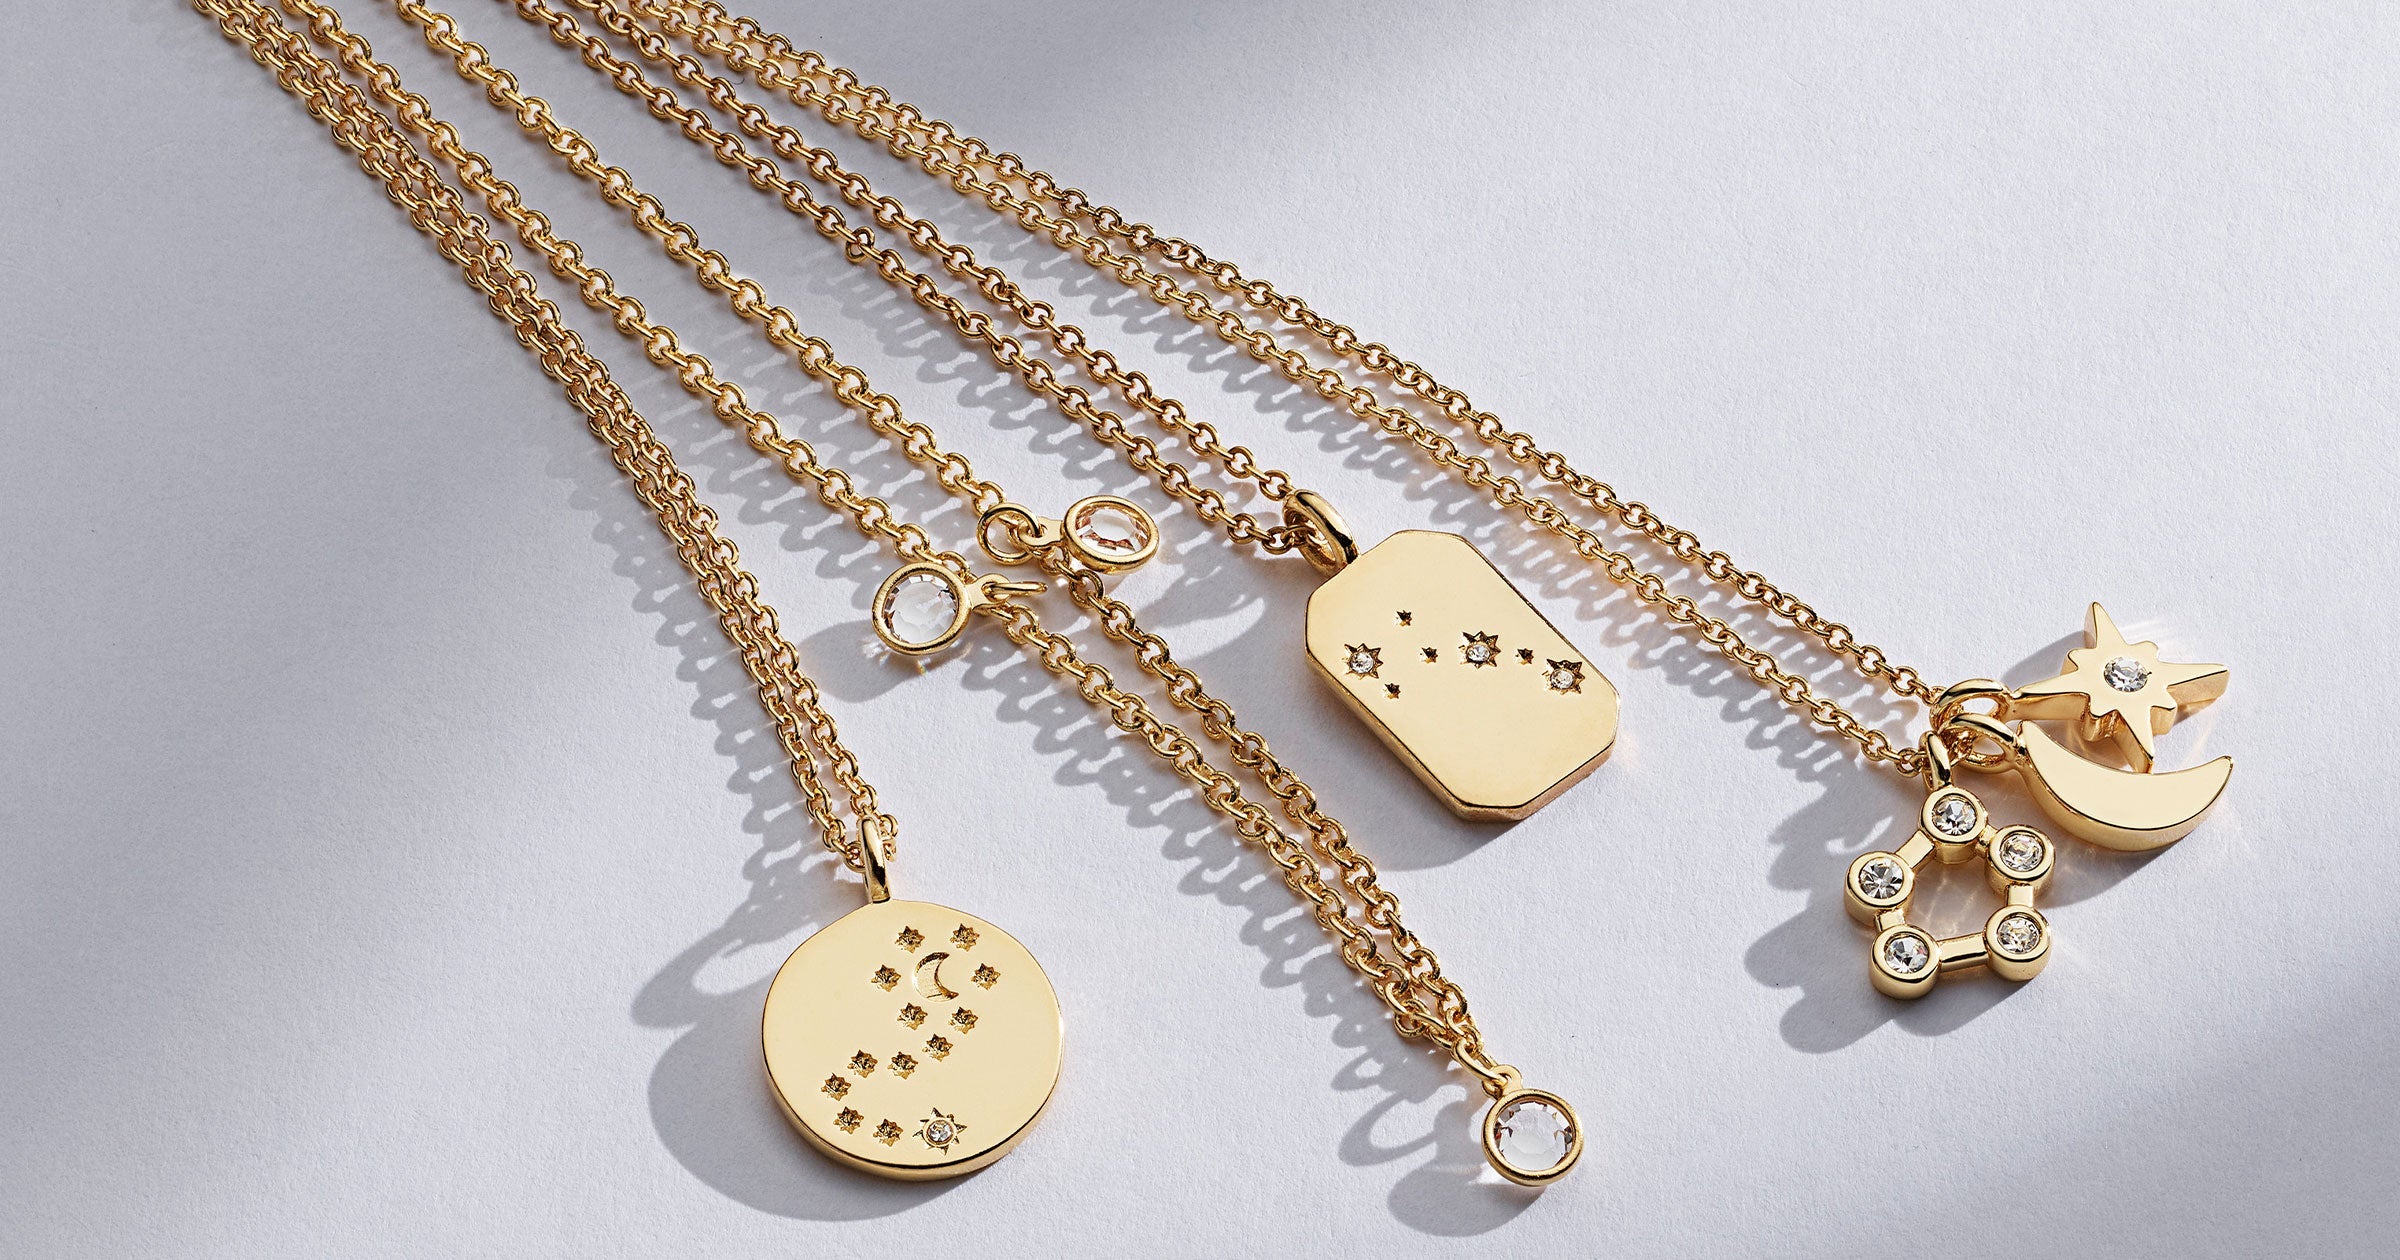 Multiple Bryan Anthonys necklaces in 14k gold finish